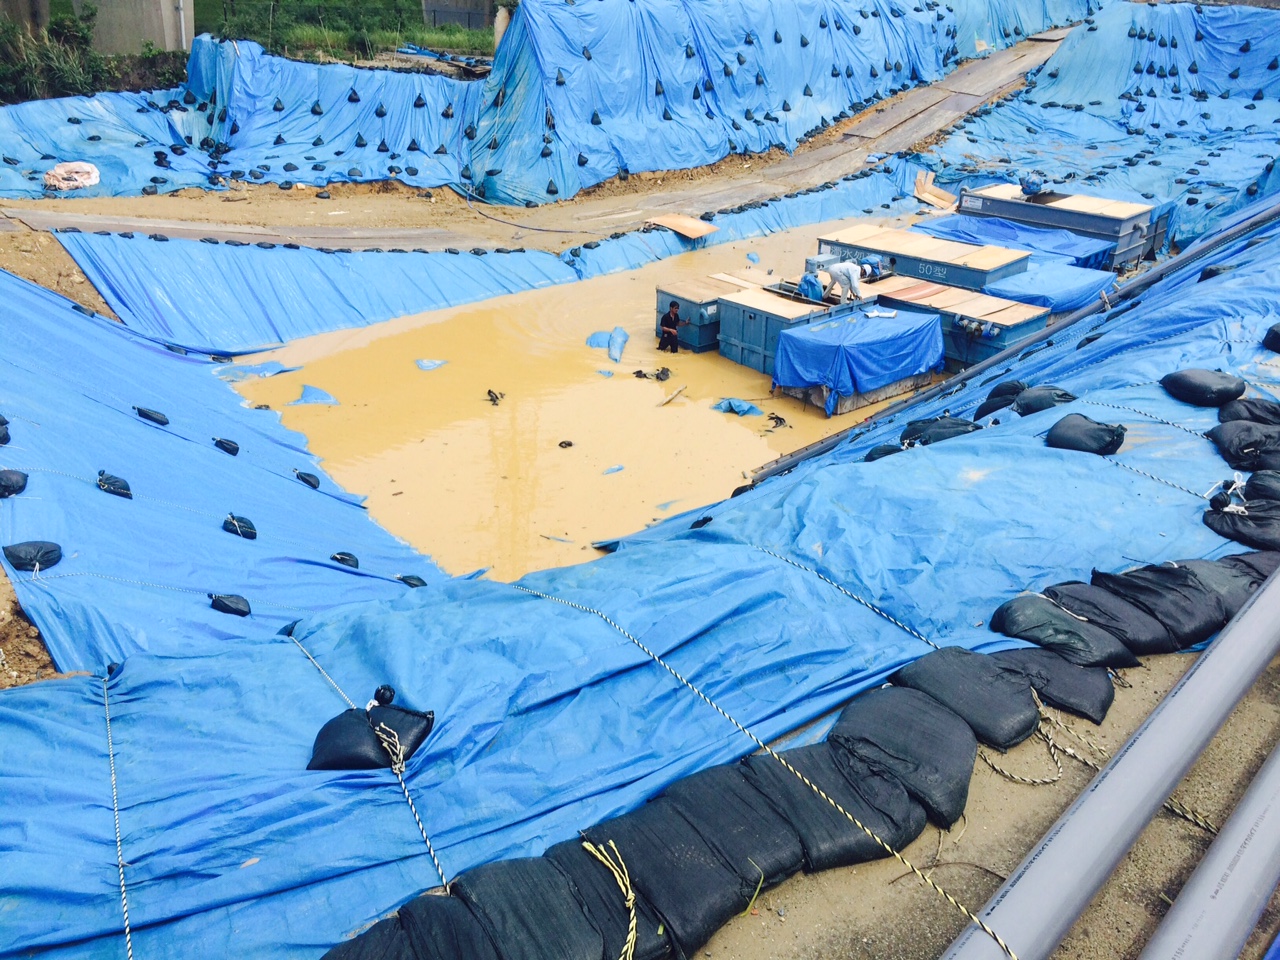 Dirty secret: Japanese workers toil without safety gear at the flooded U.S. military dioxin dump site in Okinawa City on Sunday. The land used to be part of Kadena Air Base, the Pentagon's busiest Okinawa installation during the Vietnam War. | KEN NAKAMURA-HUBER